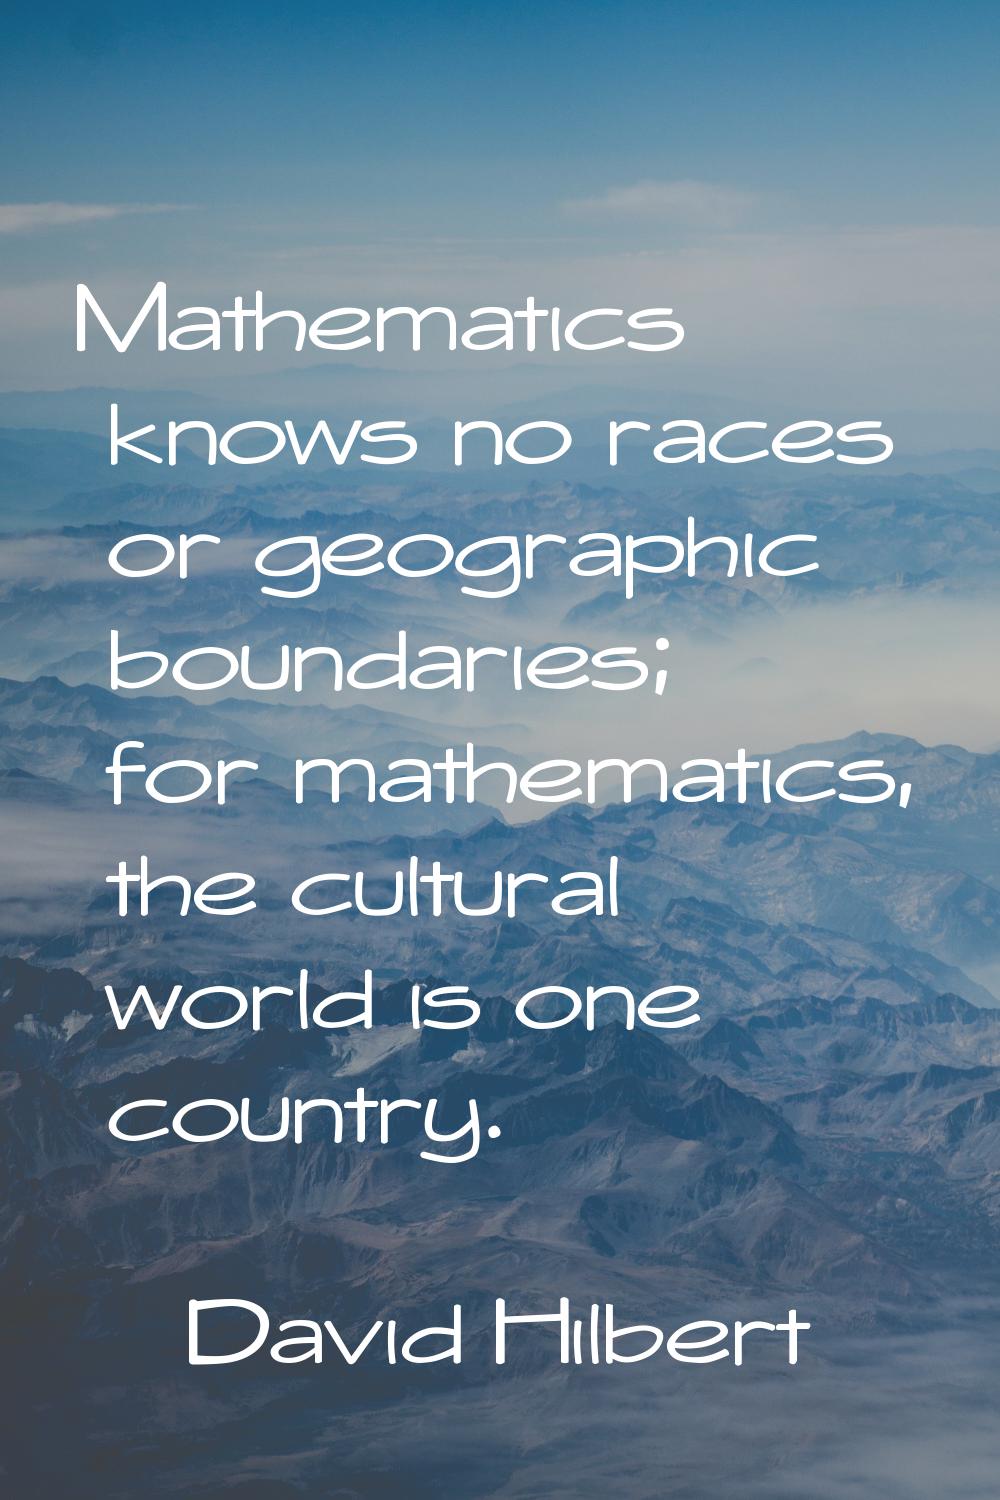 Mathematics knows no races or geographic boundaries; for mathematics, the cultural world is one cou